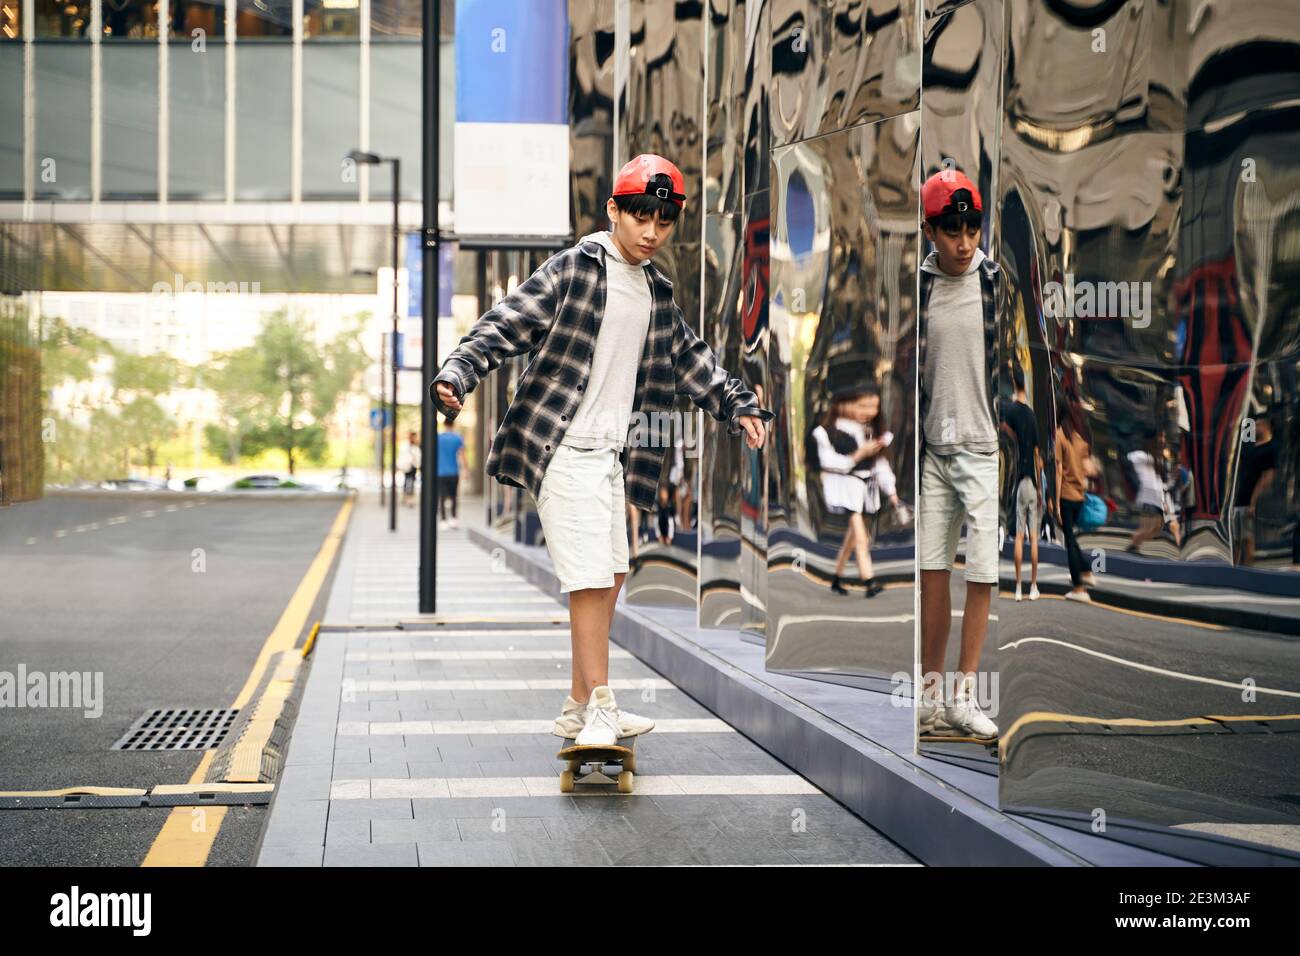 teenage asian child skateboarding outdoors in the street Stock Photo